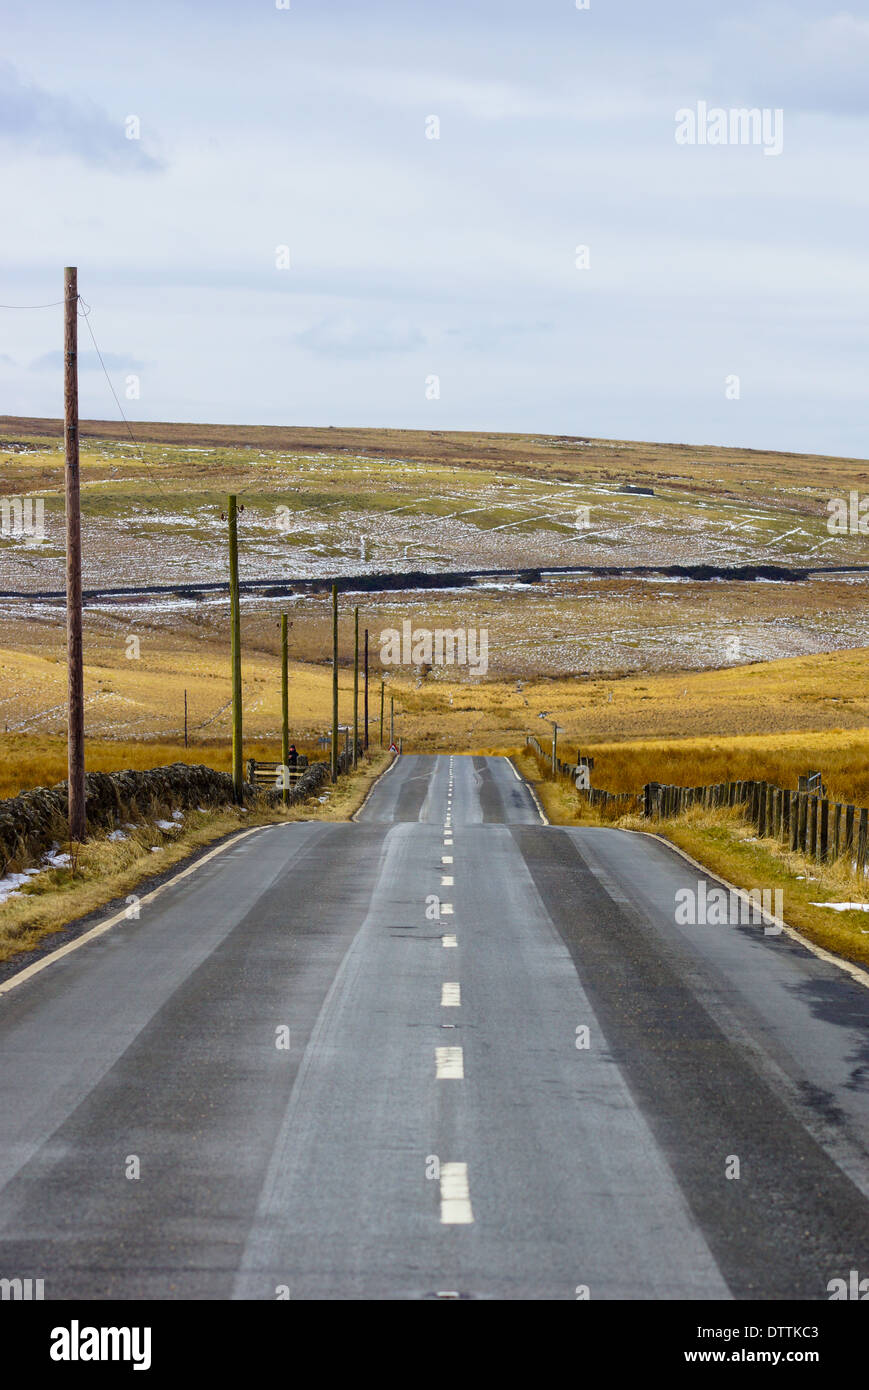 Country Highway with Straight road lined with telegraph poles Stock Photo